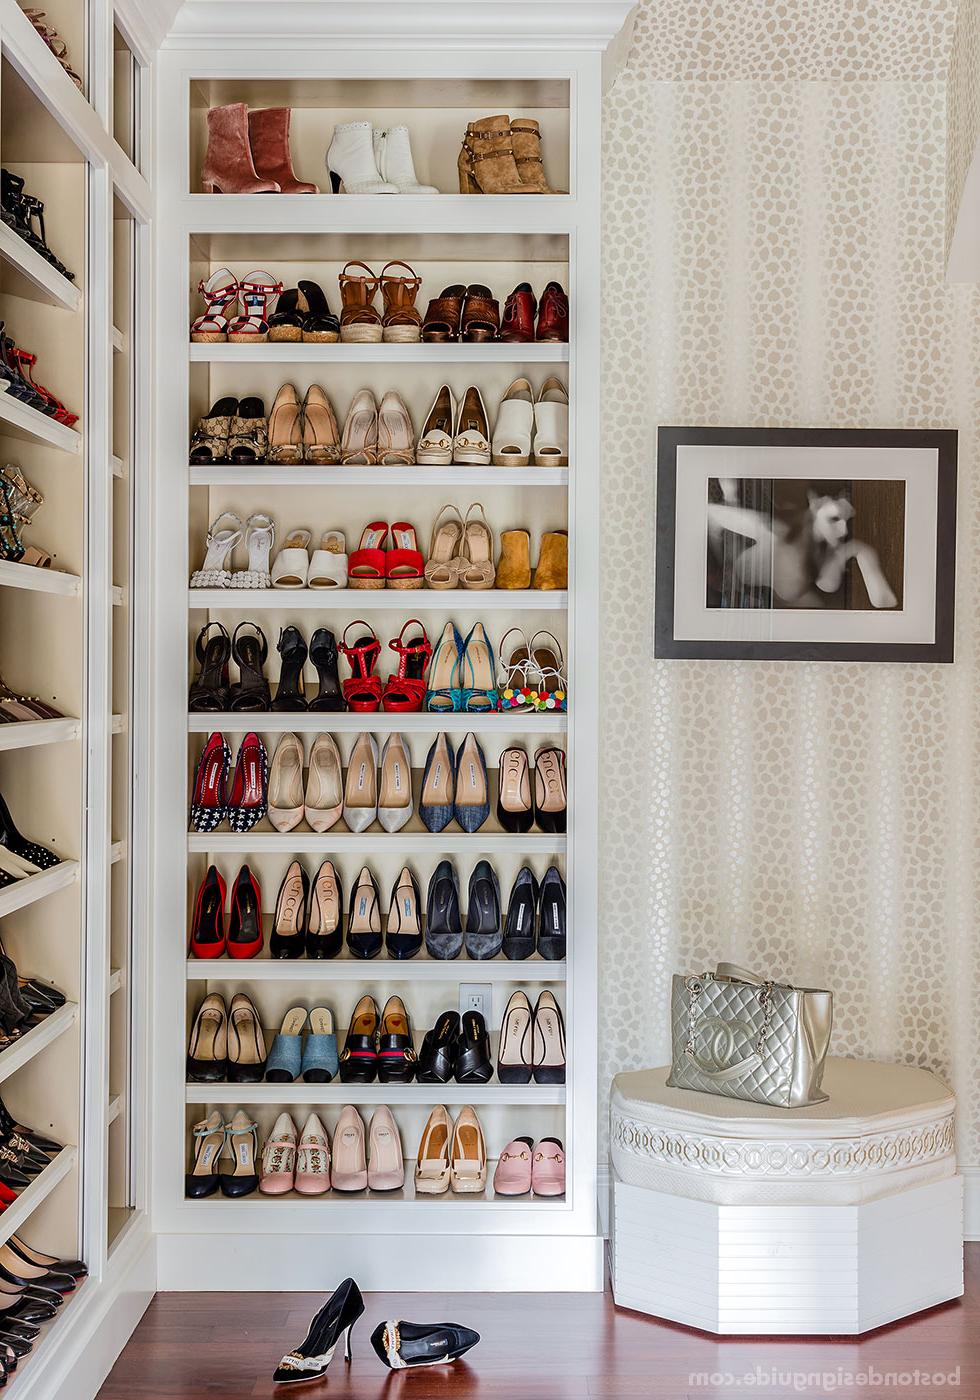 Luxe custom closet design for shoes by Betsy Bassett Interiors